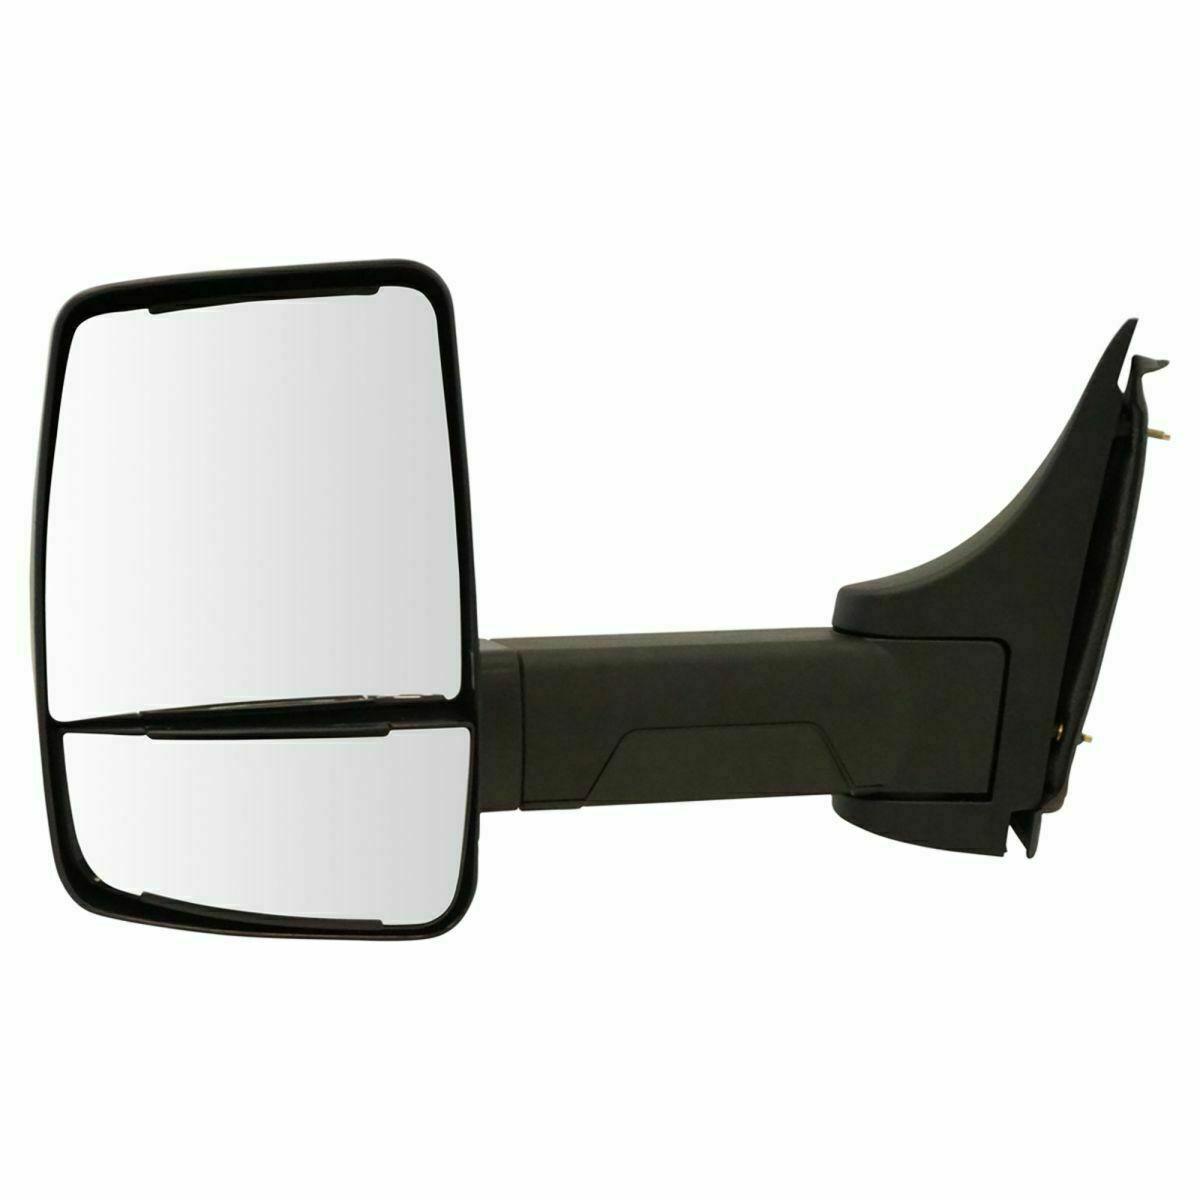 715913 Velvac Left Deluxe Manual Mirror Assembly For 96' Body Stepvans - ADVANCED TRUCK PARTS